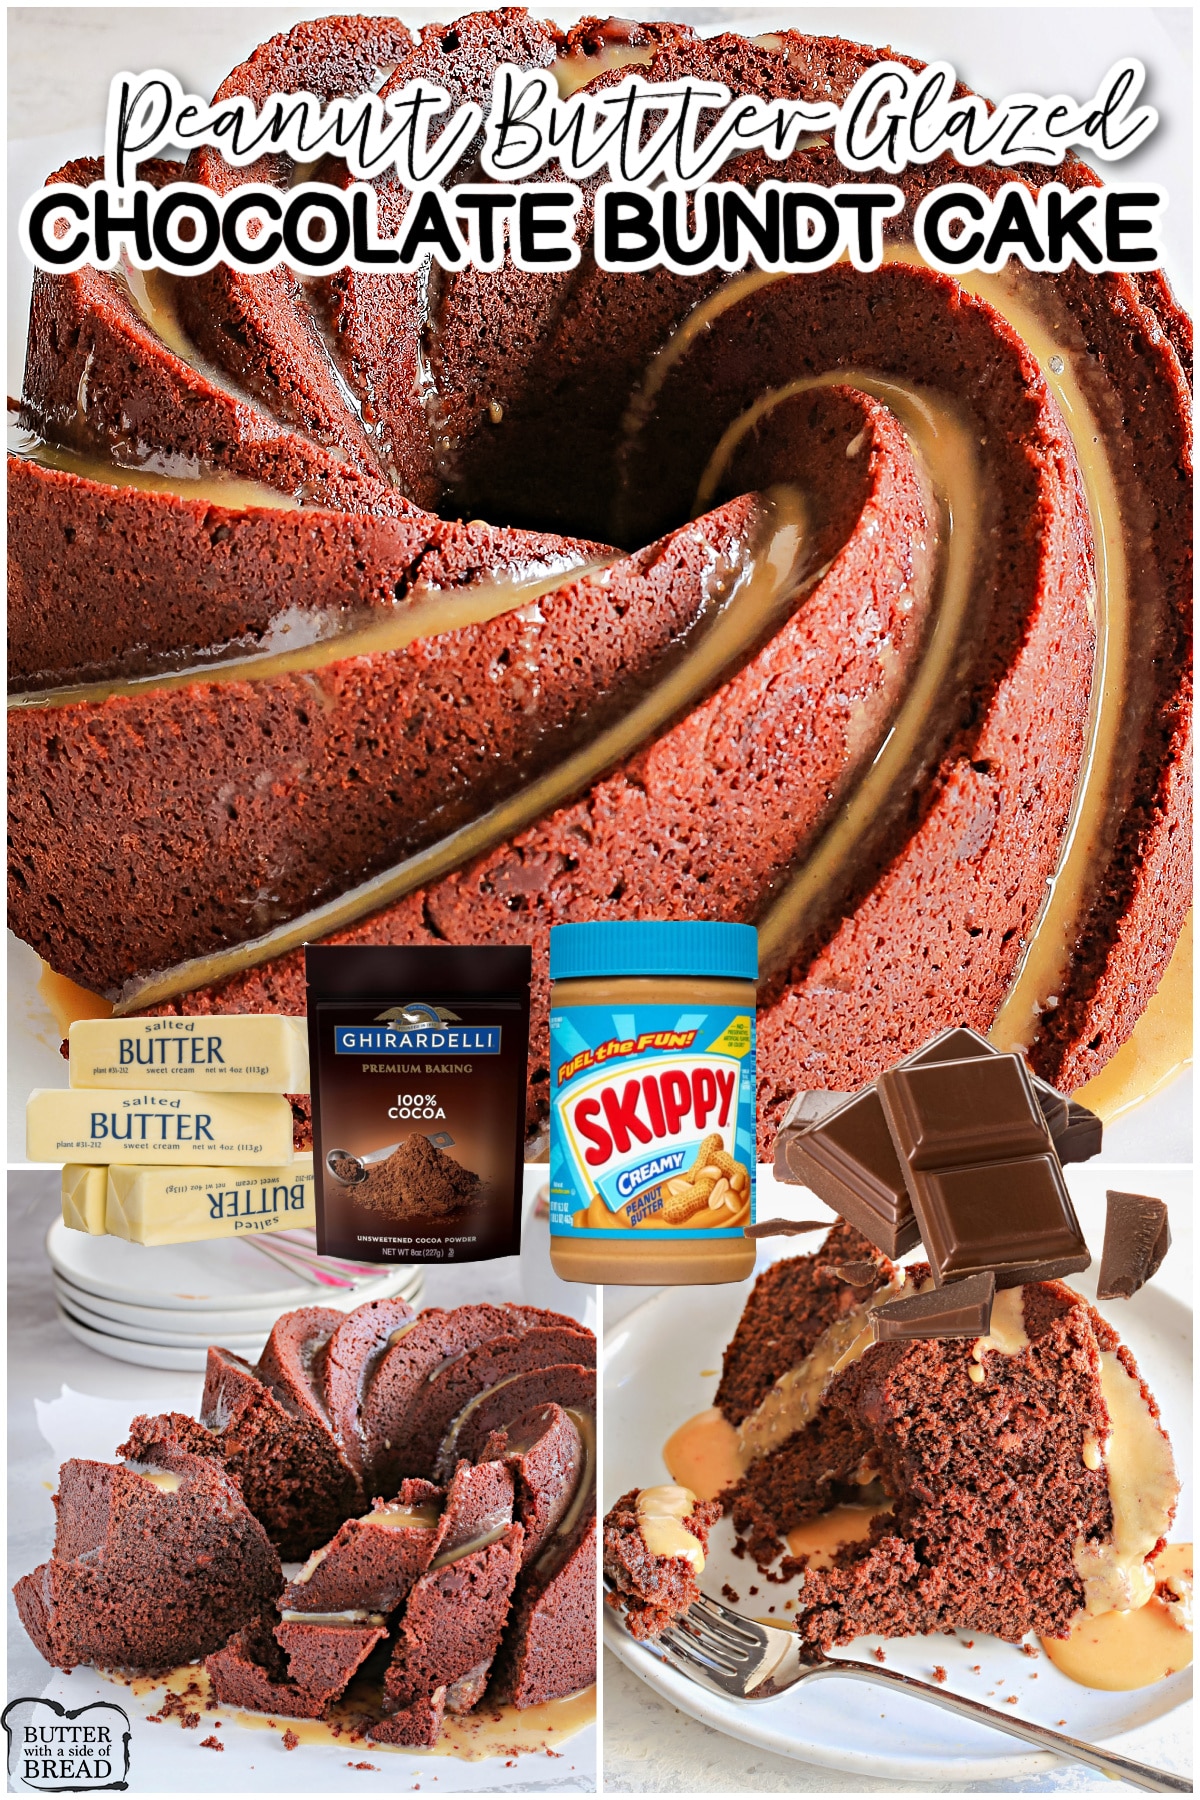 Chocolate Bundt Cake with Peanut Butter Glaze features a moist rich cake, loaded with chocolate chips and drizzled with a creamy peanut butter glaze.